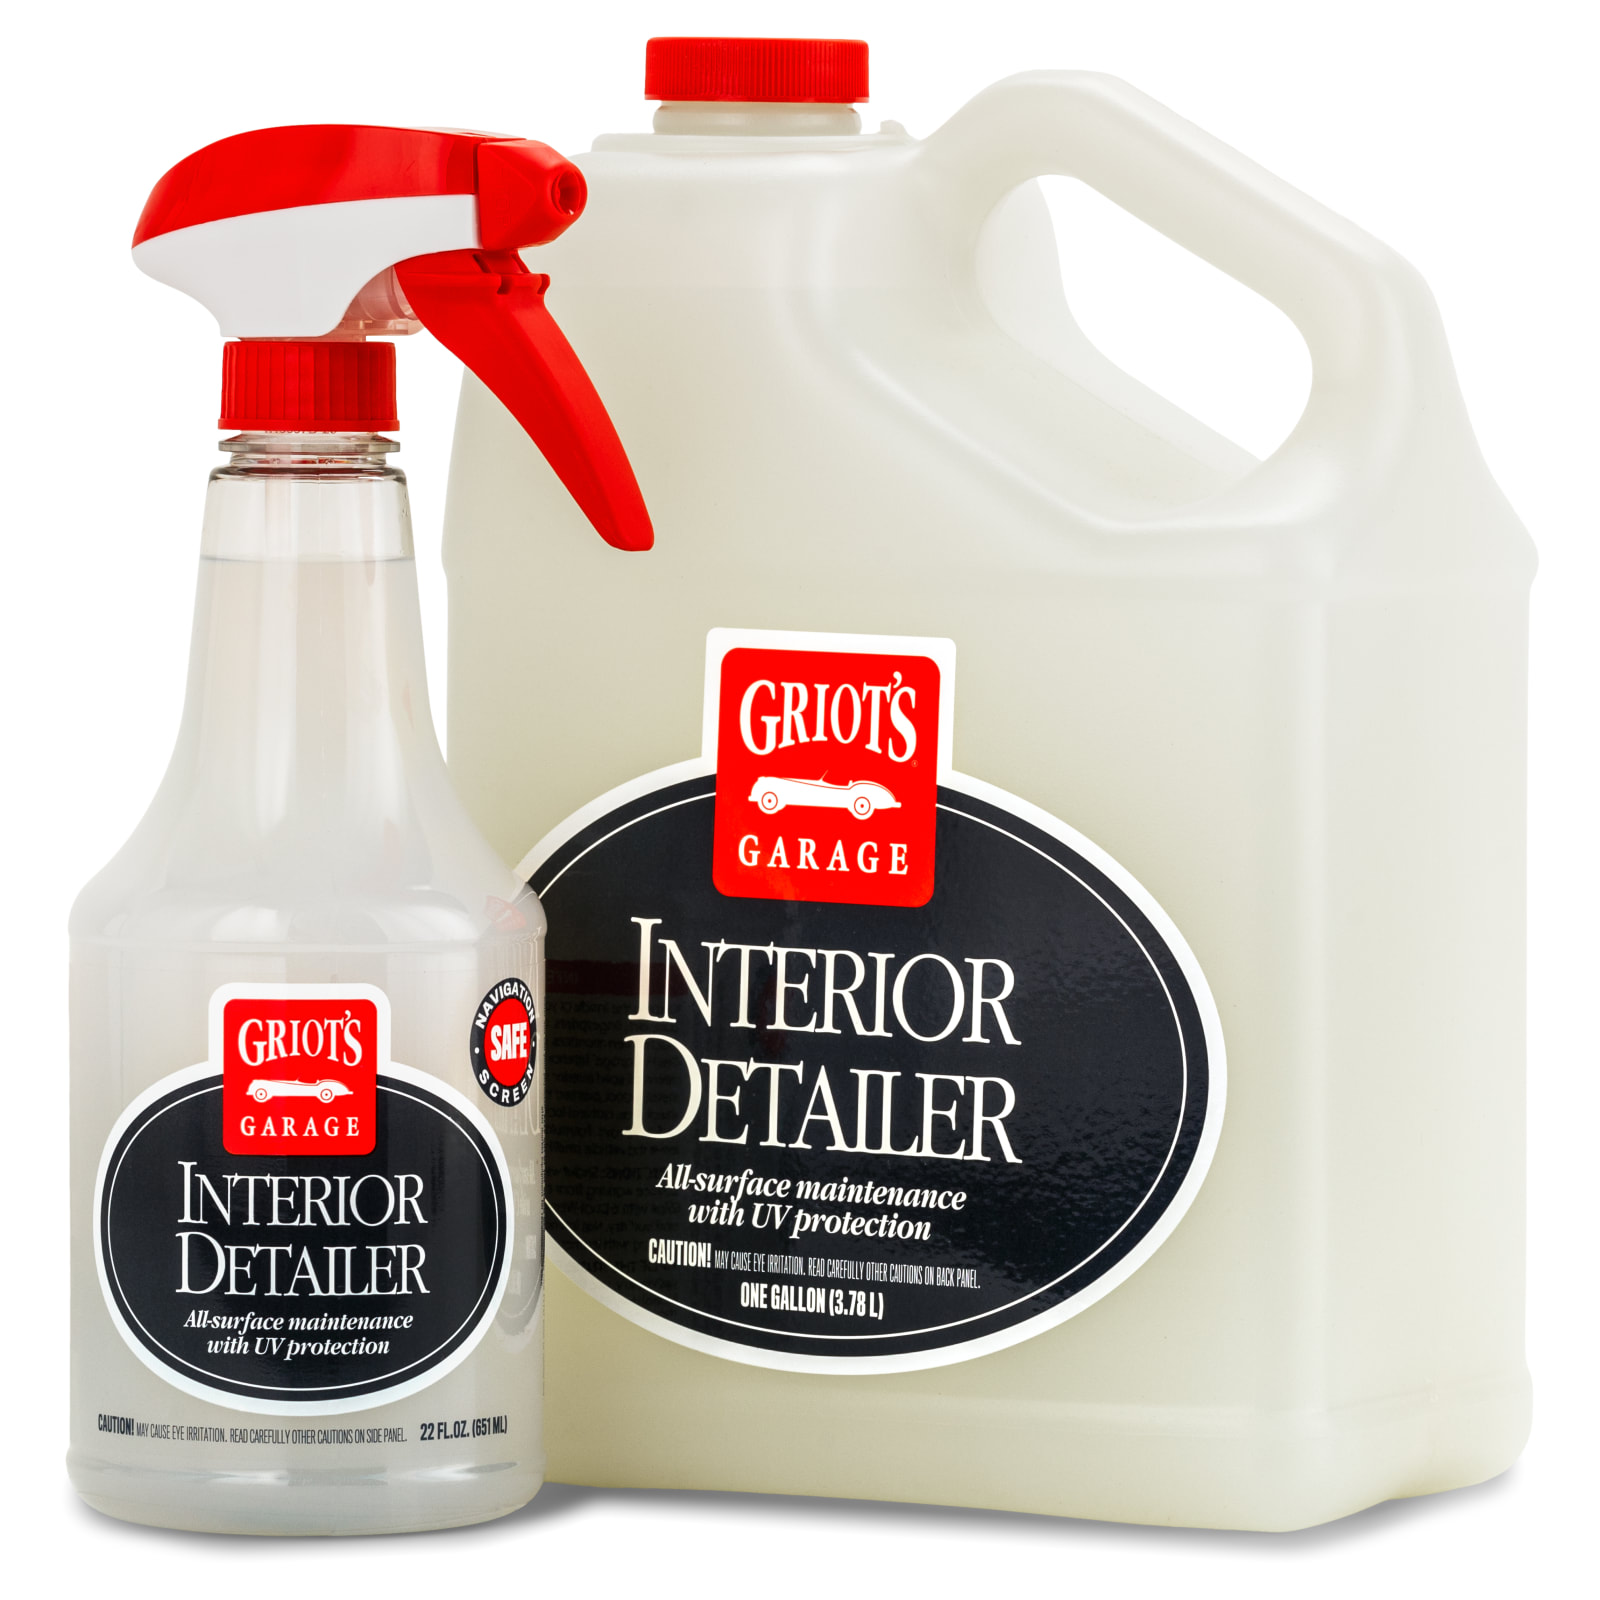 Keep Your Interior Clean with Our Lather, Vinyl, Plastic Interior Cleaner